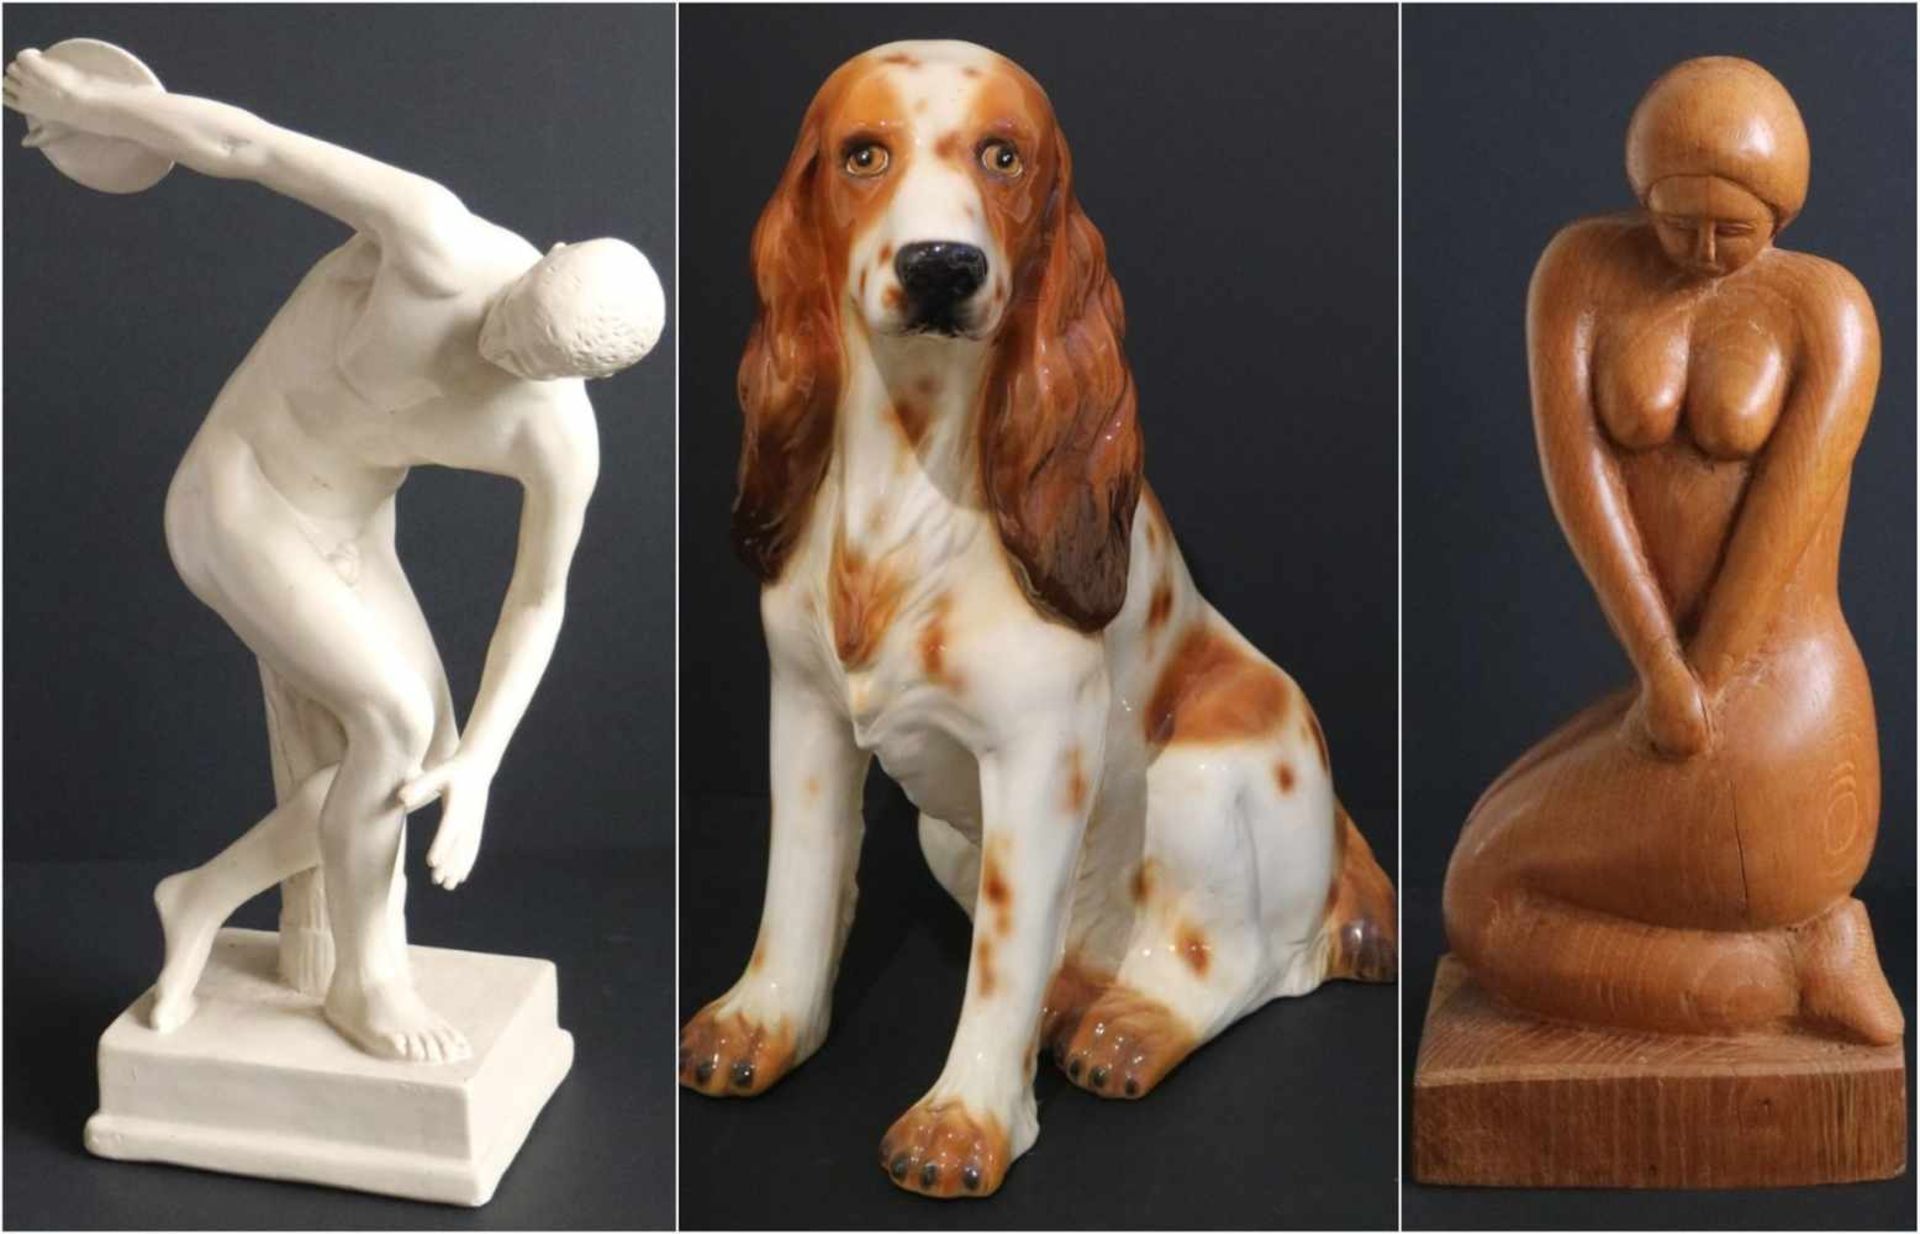 Lot of various items ao discus throwerCeramic Dog, Wooden statue NudeH 45, 47 and 38 cm